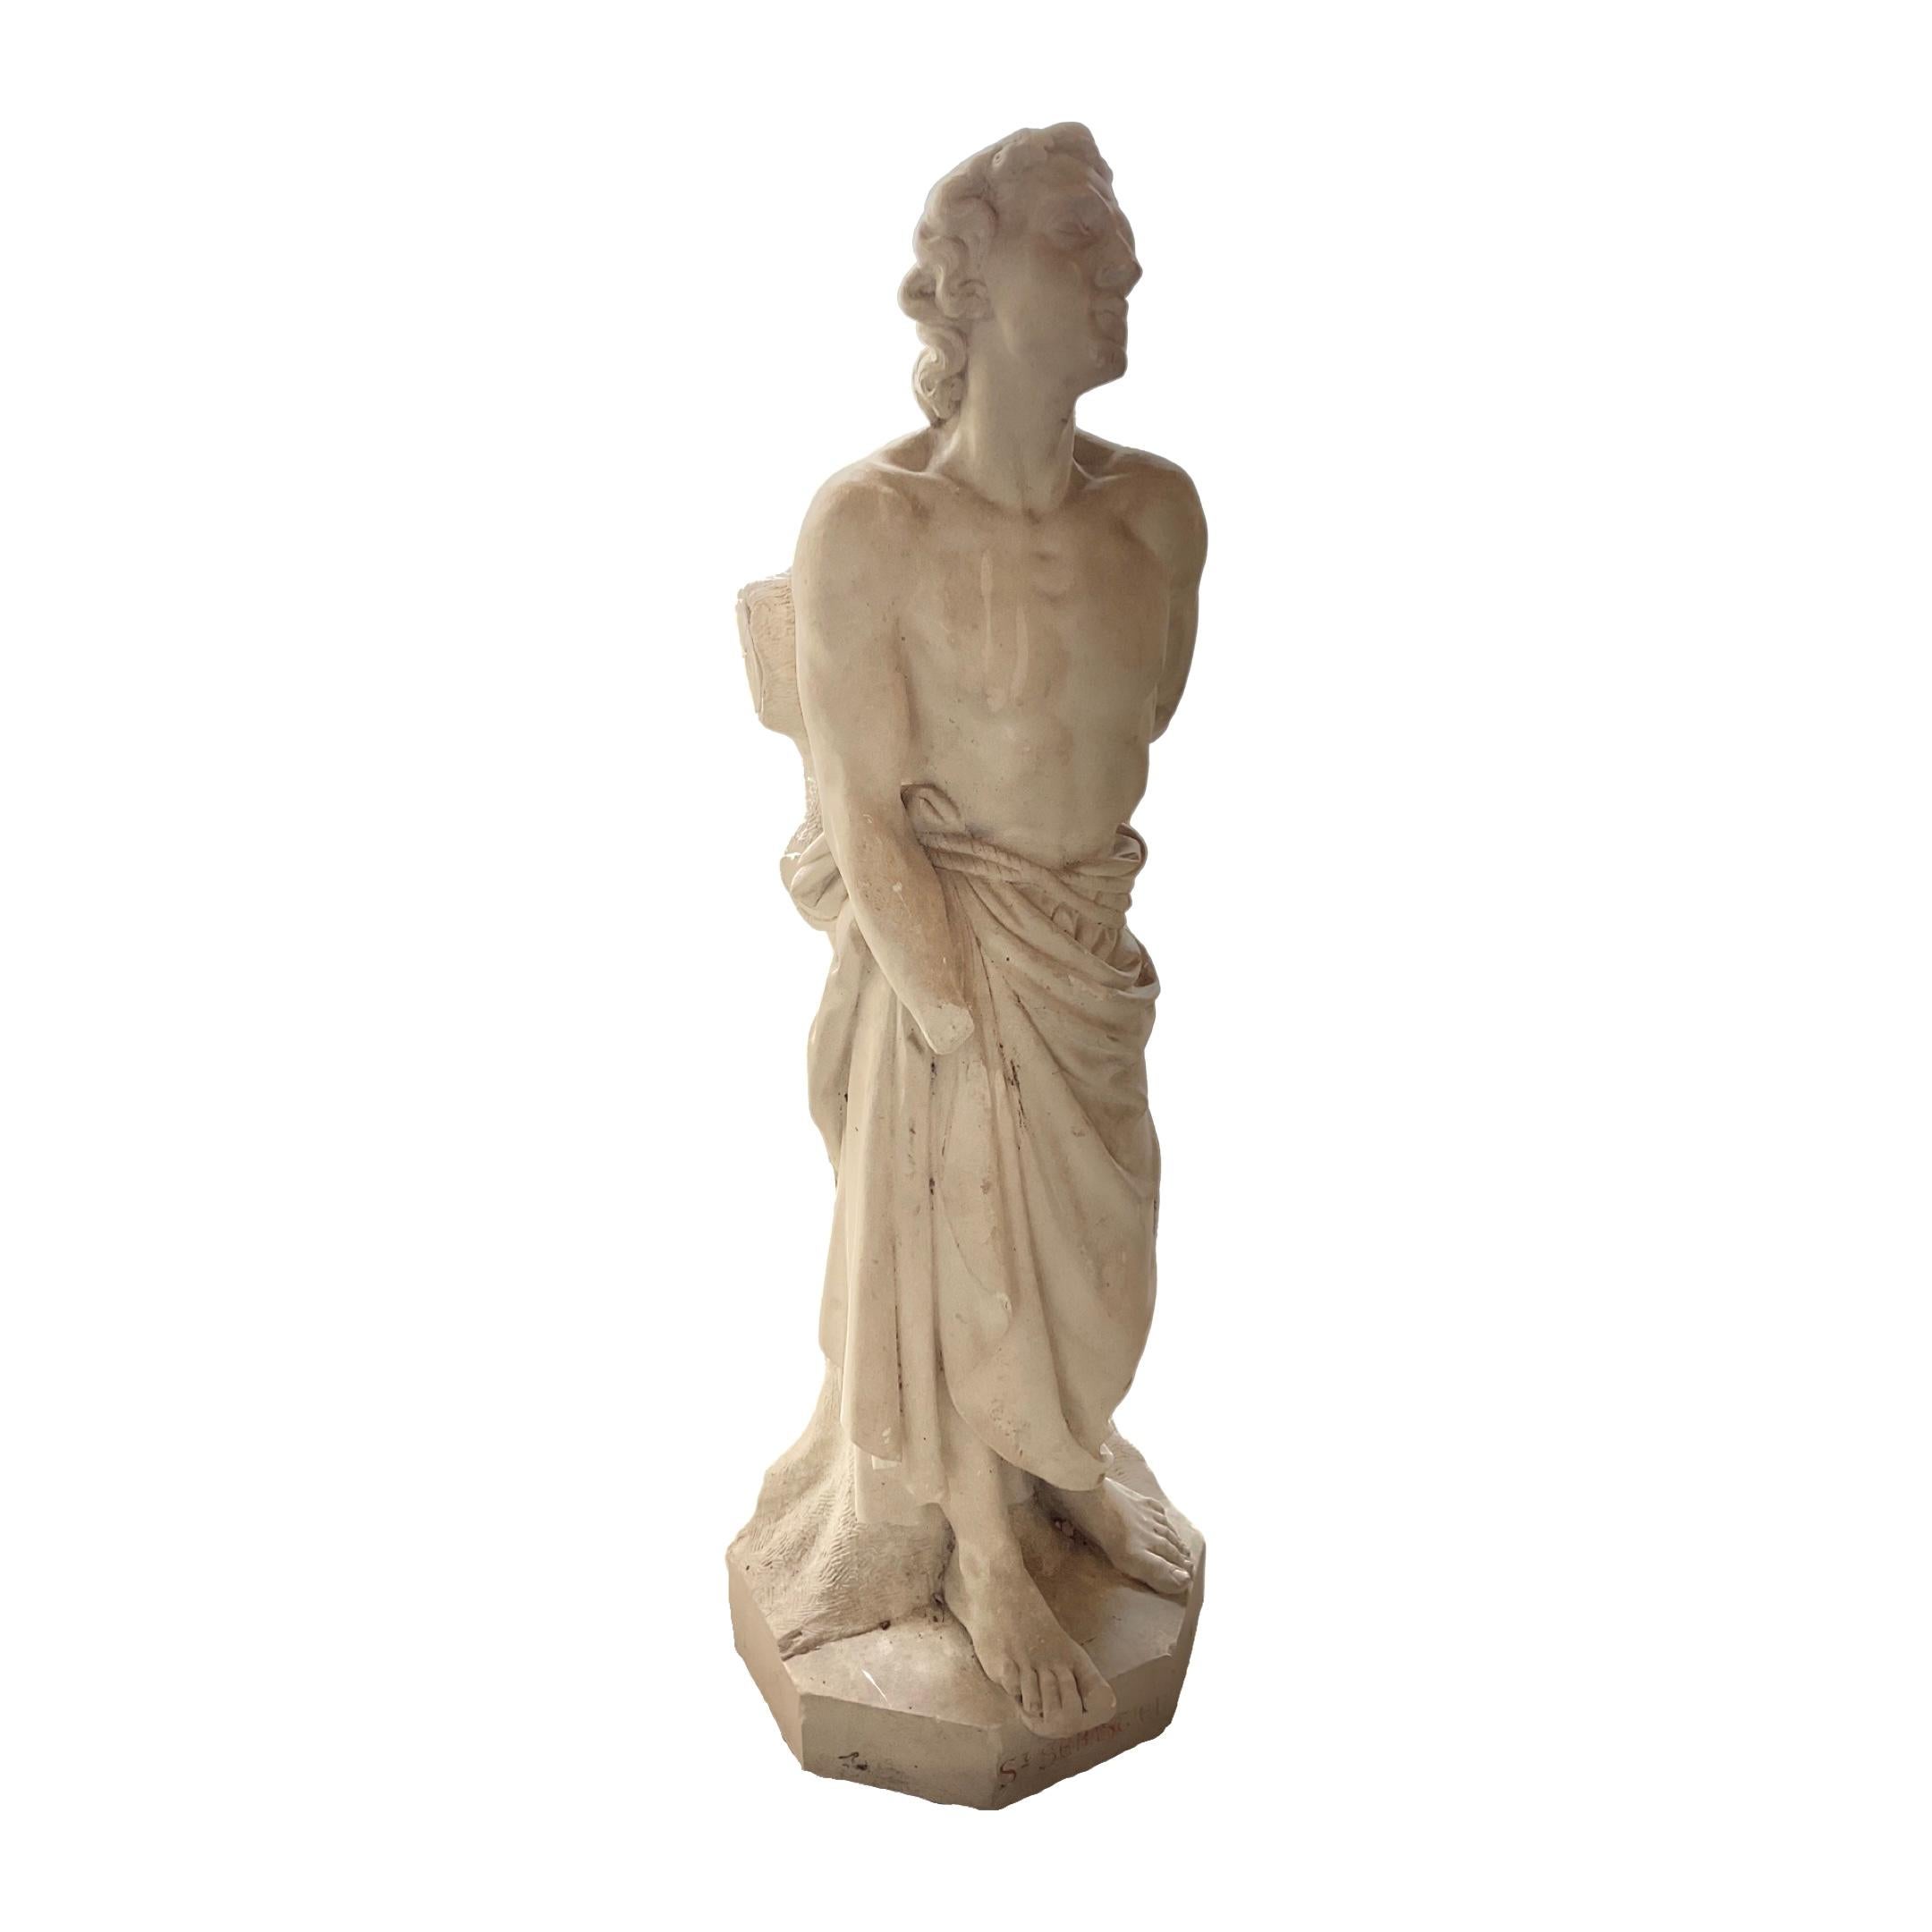 This French limestone Saint sculpture is an exquisite creation from the 17th century, exhibiting expert craftsmanship and a lasting reminder of the period. Its careful composition of French limestone ensures that it is an enduring artistic tribute